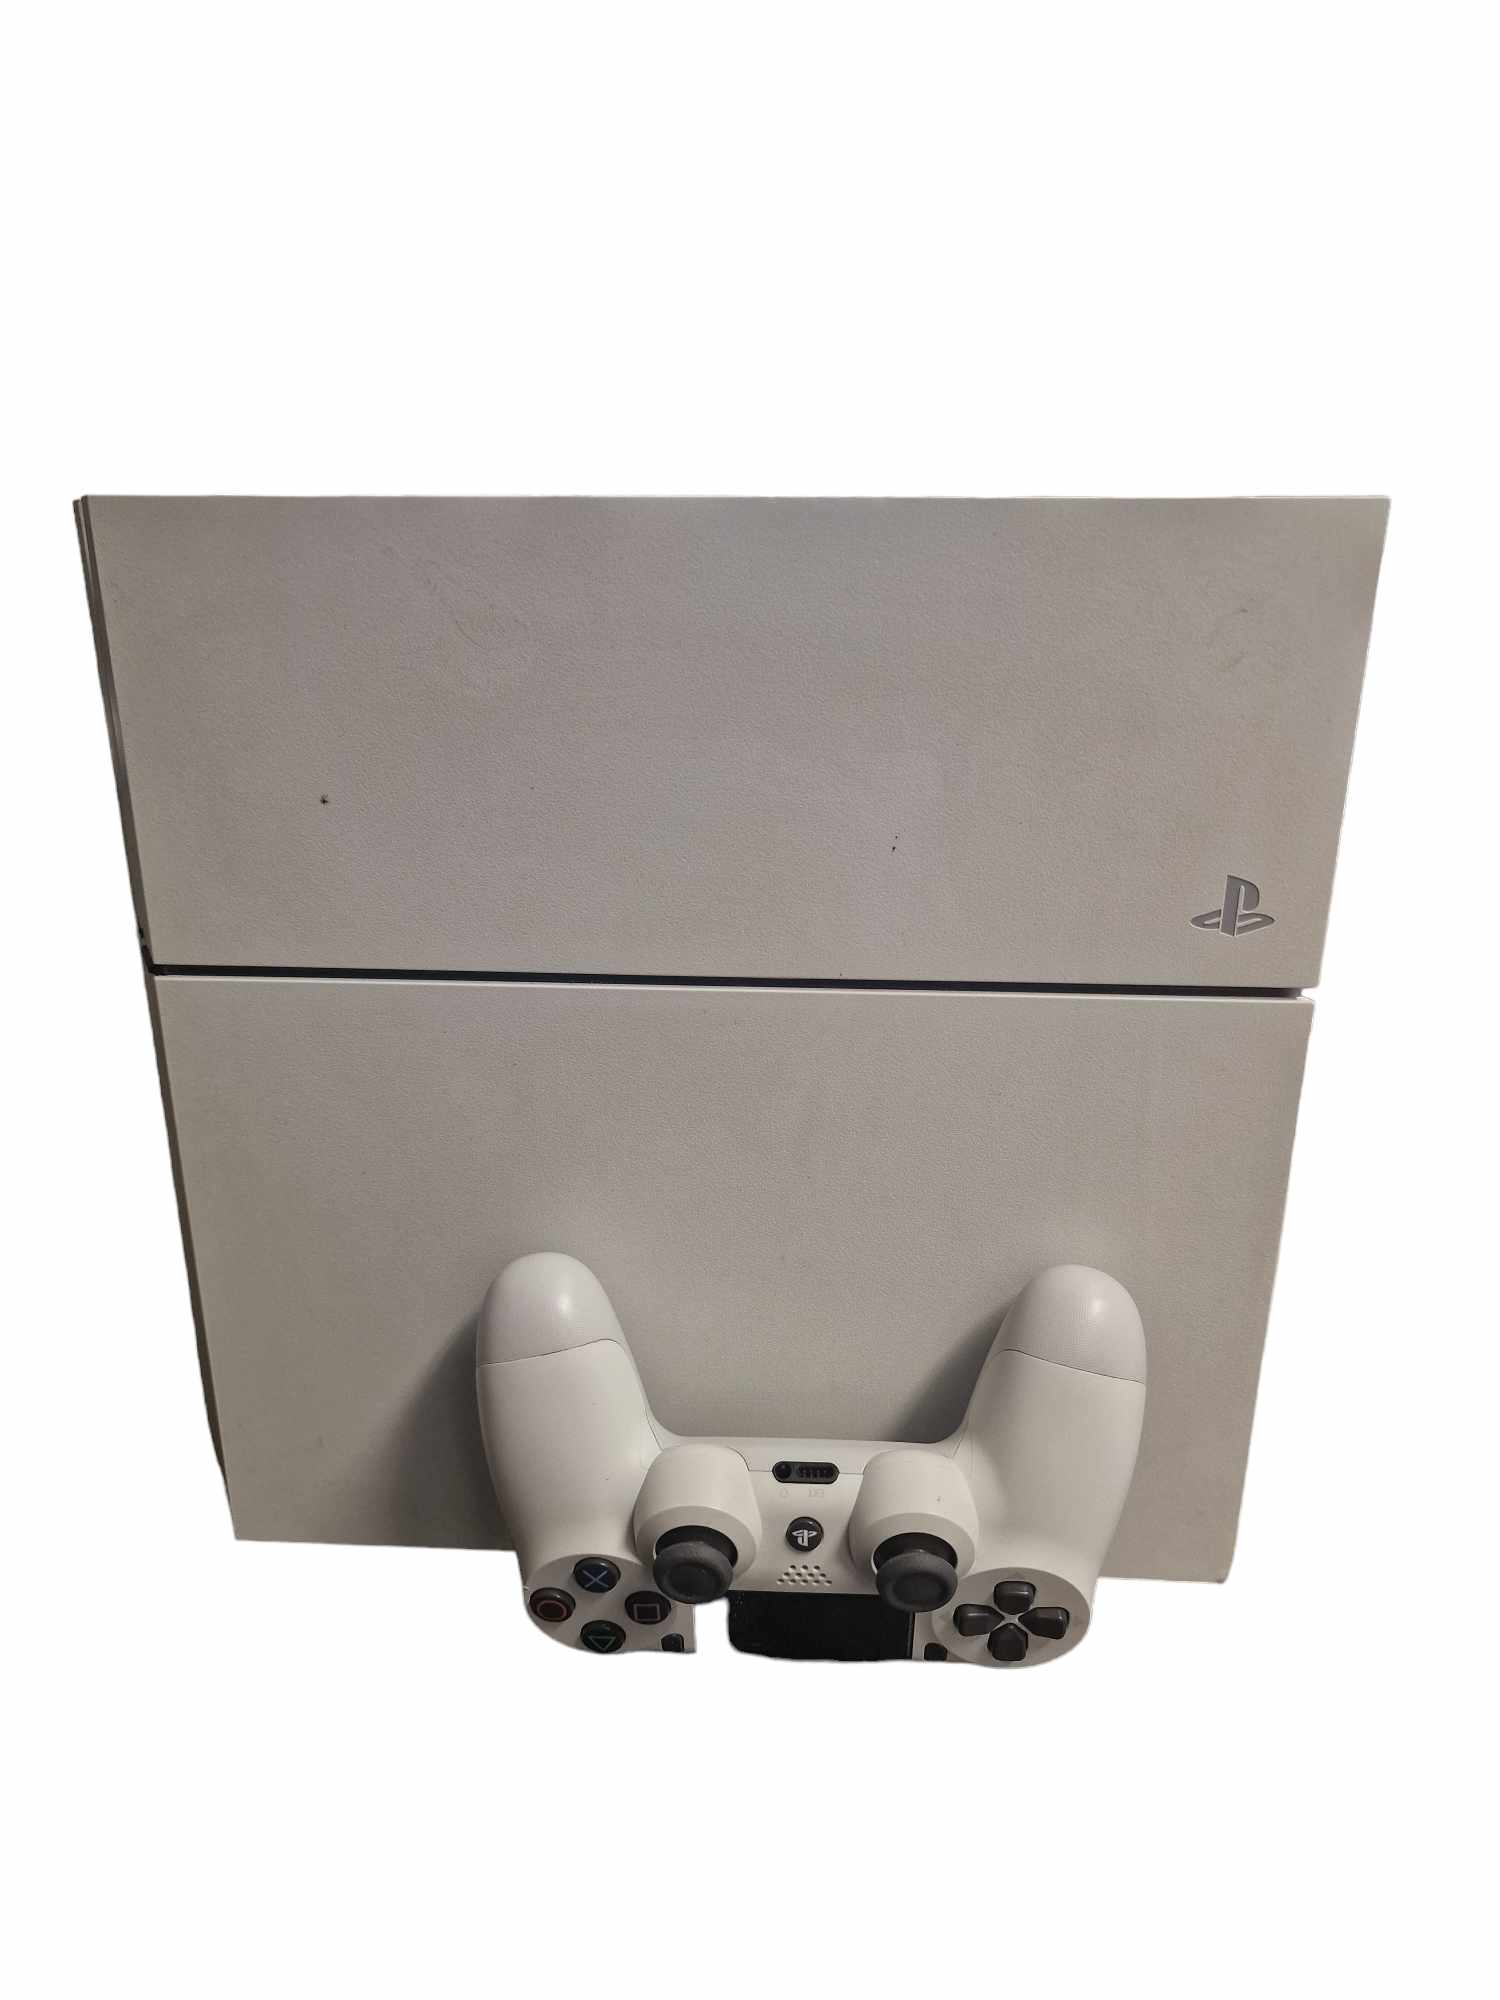 PS4 white 500GB 1 Controller All Wires